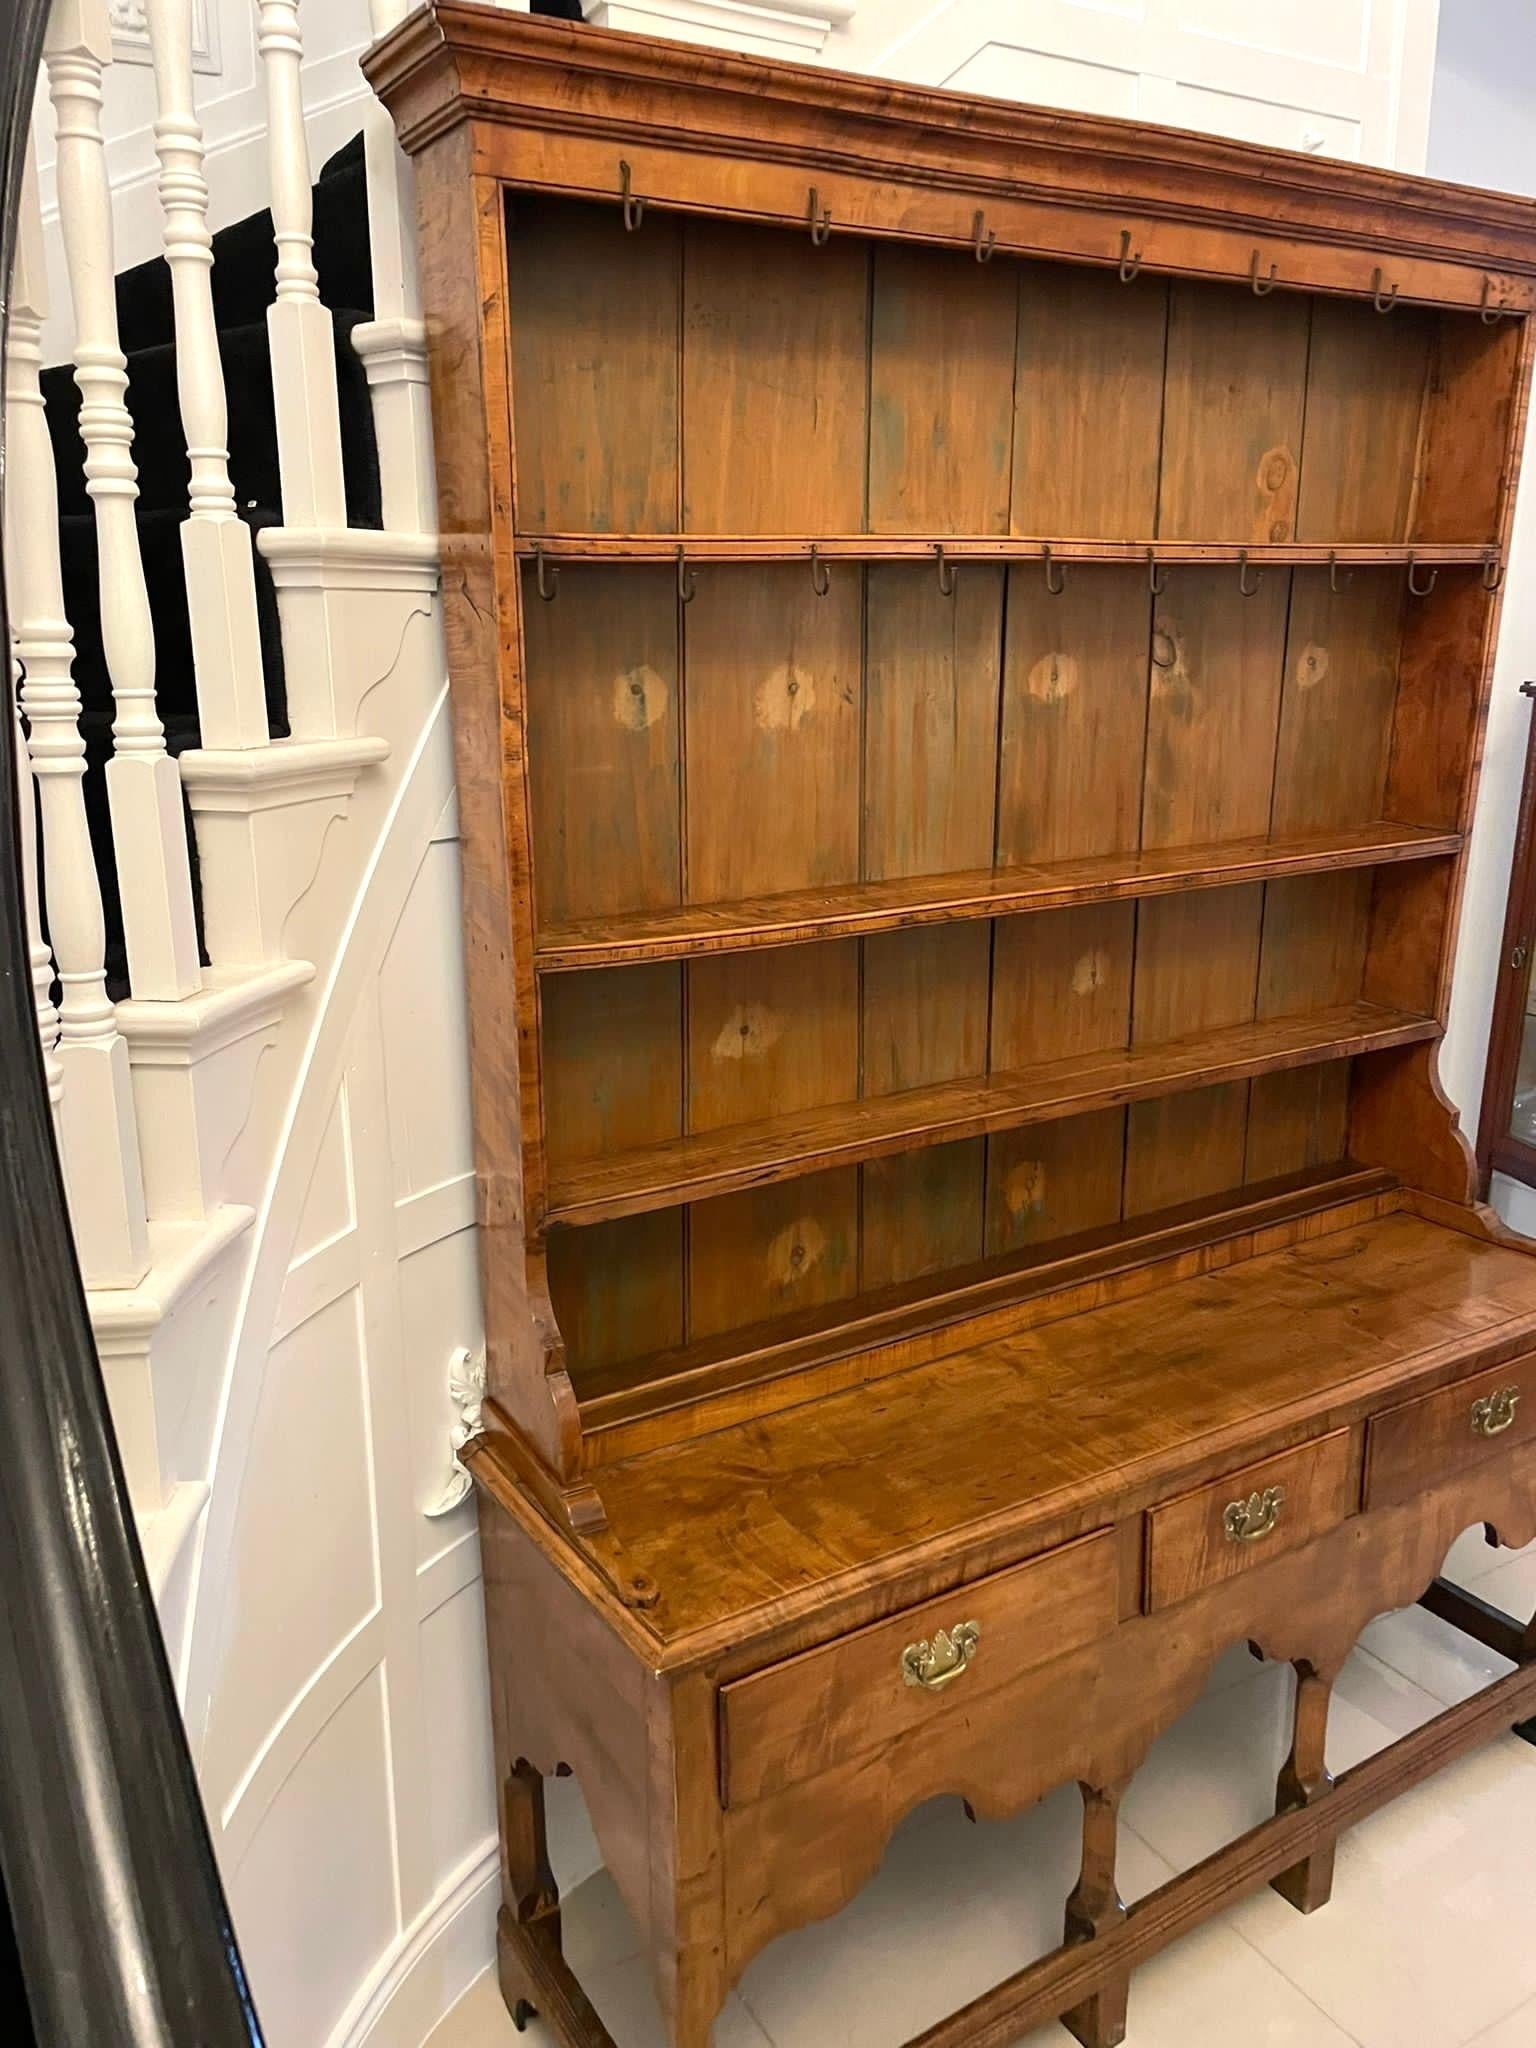 Rare American Antique George III Quality Solid Maple Wood Dresser and Rack For Sale 5